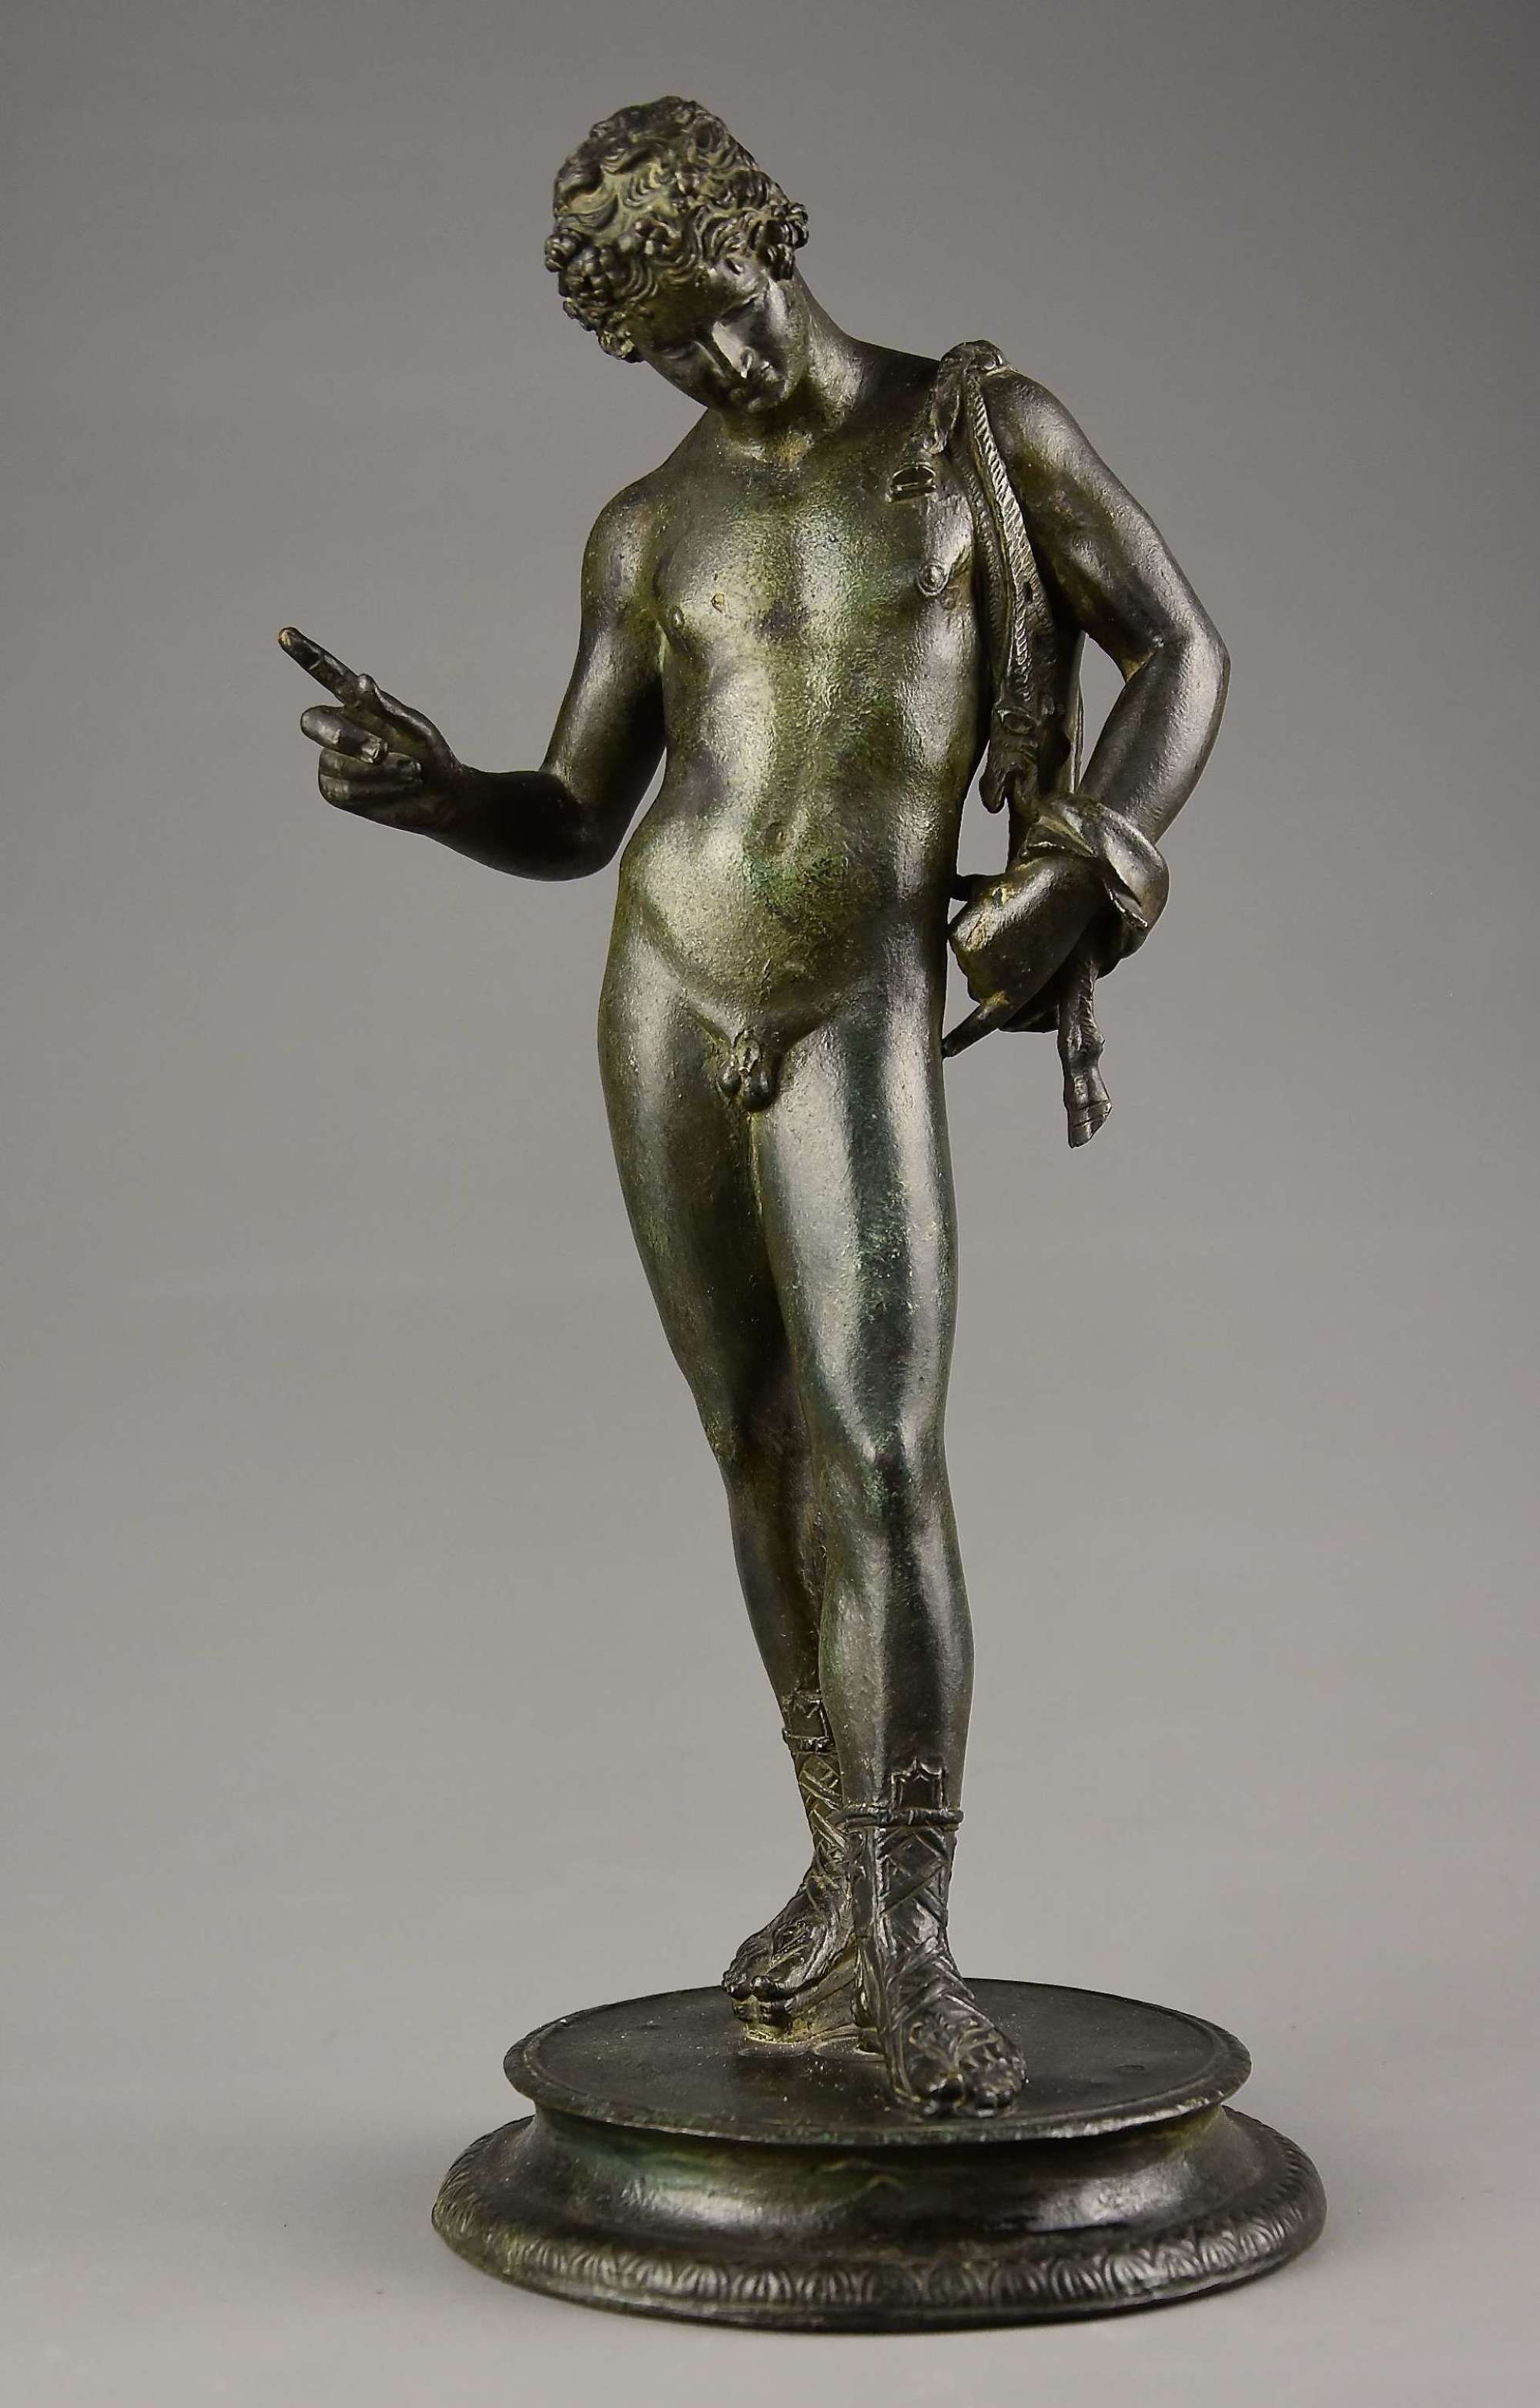 19thc Grand Tour Neapolitan bronze of Narcissus, after the Antique